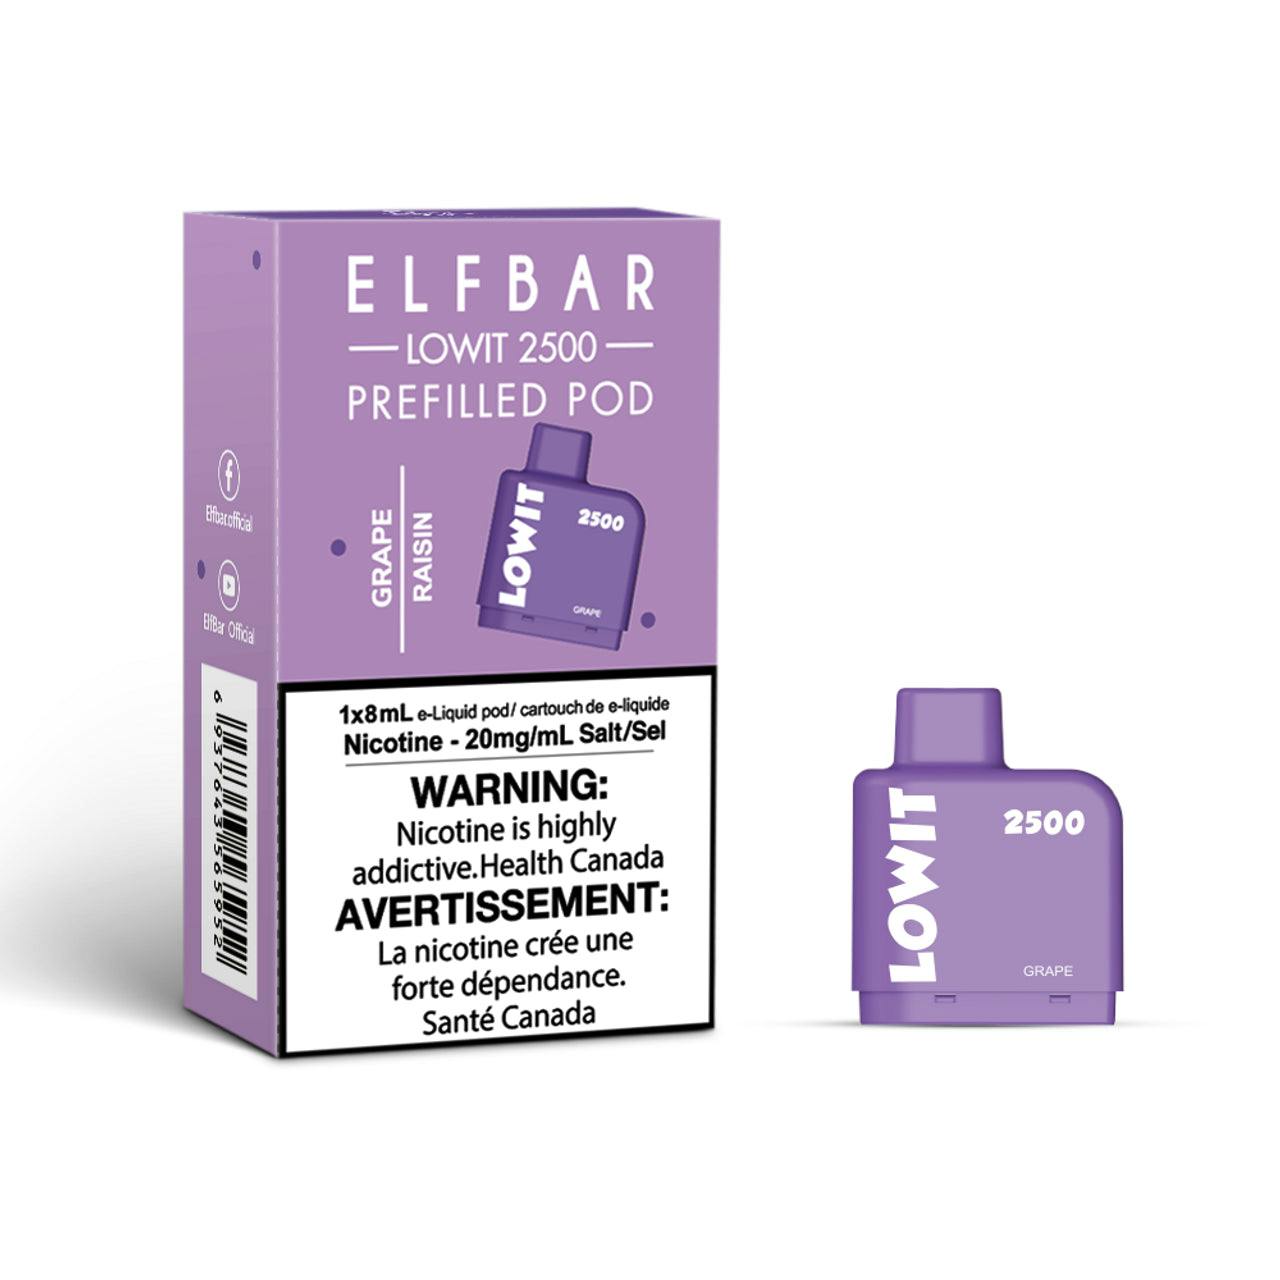 Elf Bar Lowit 2500 Puff Prefilled Pod - 10ct - Excise Version-undefined | For sale Jubilee Distributors